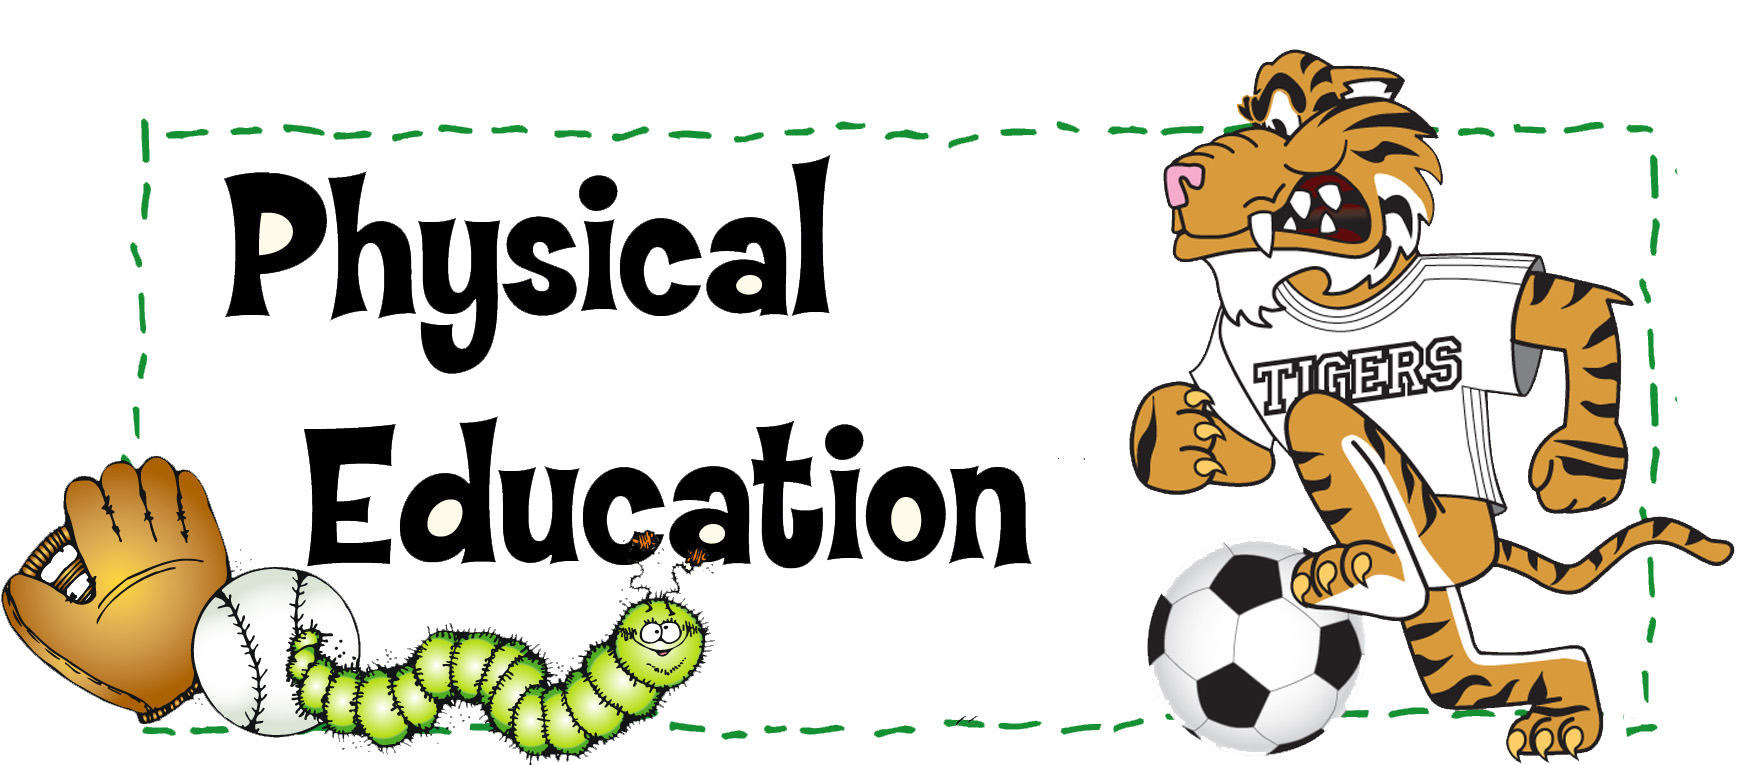 physical education clipart - photo #19